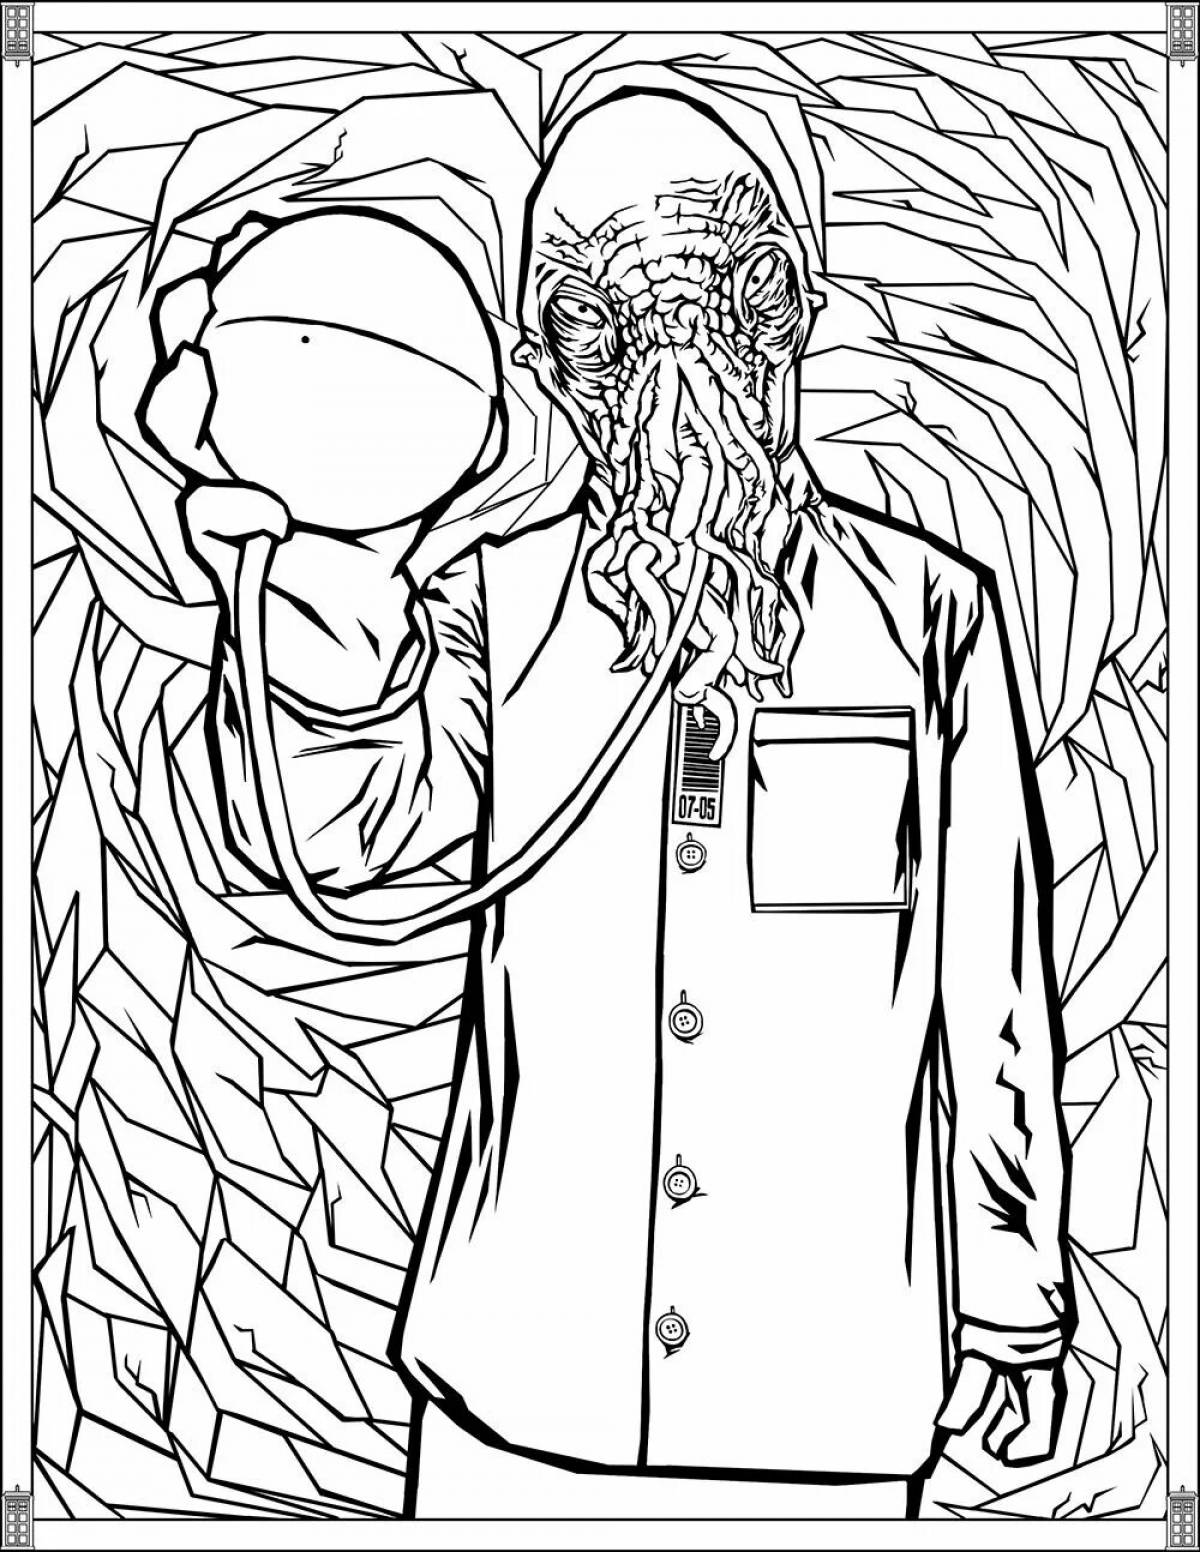 Coloring book innovative doctor